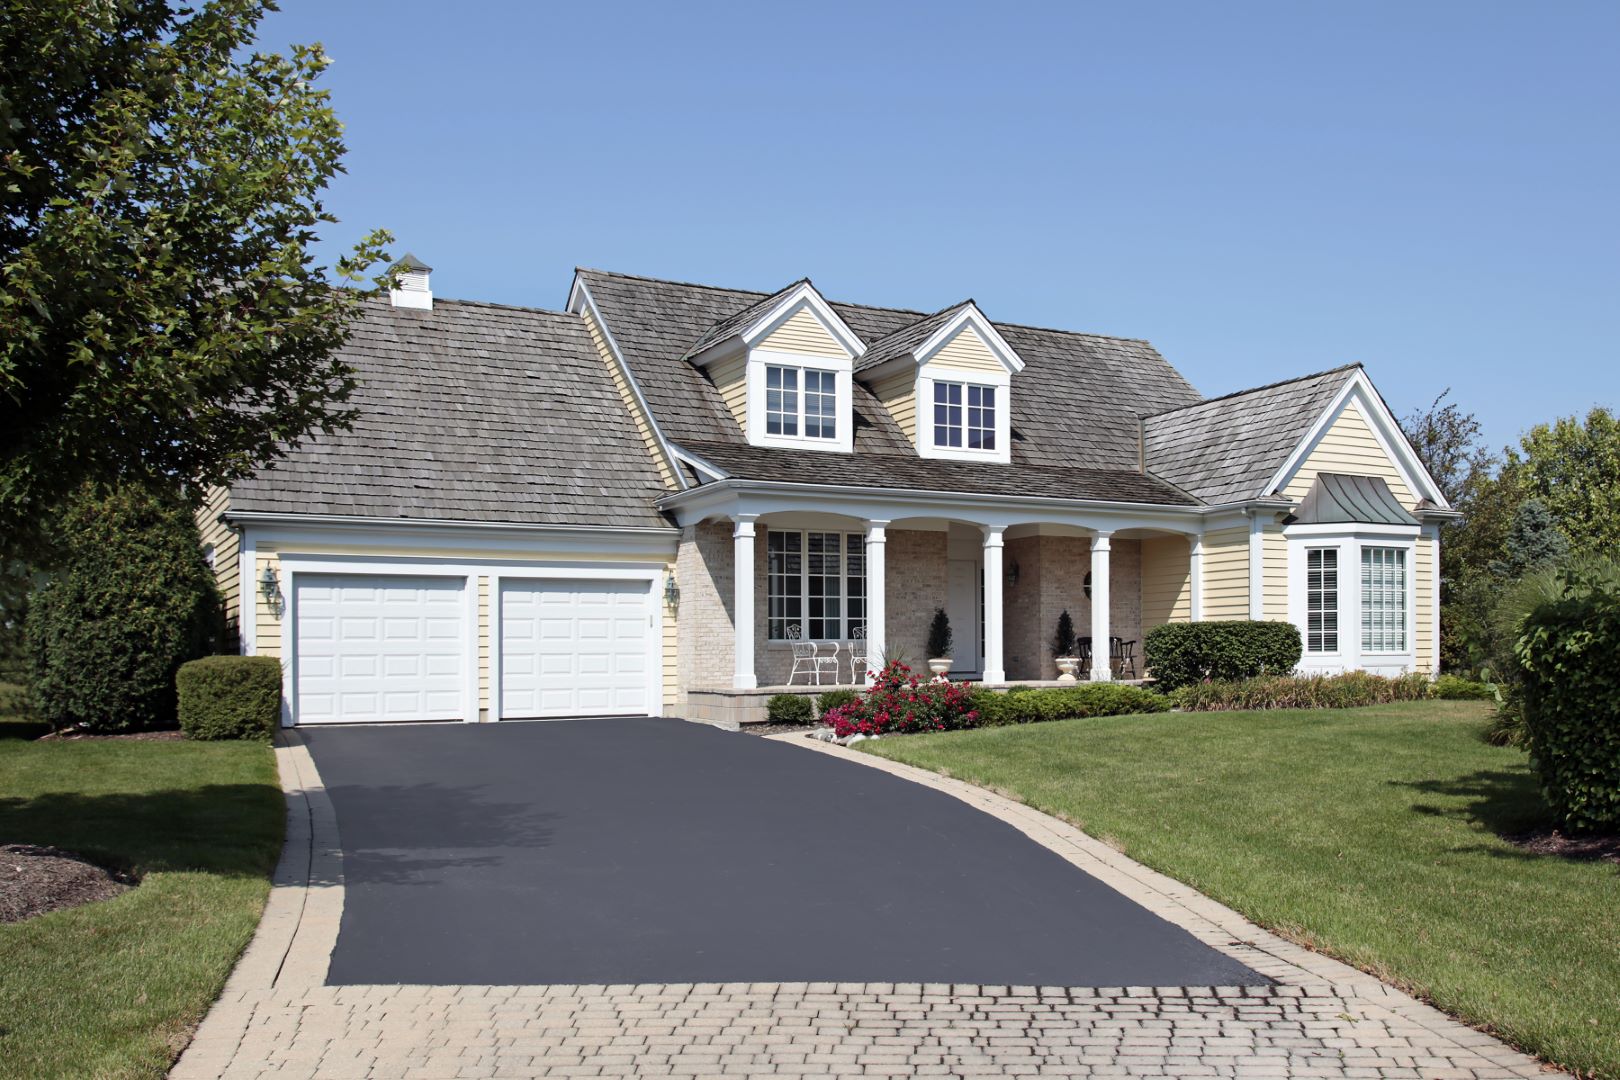 driveway-up-to-residential-home-two-car-garage